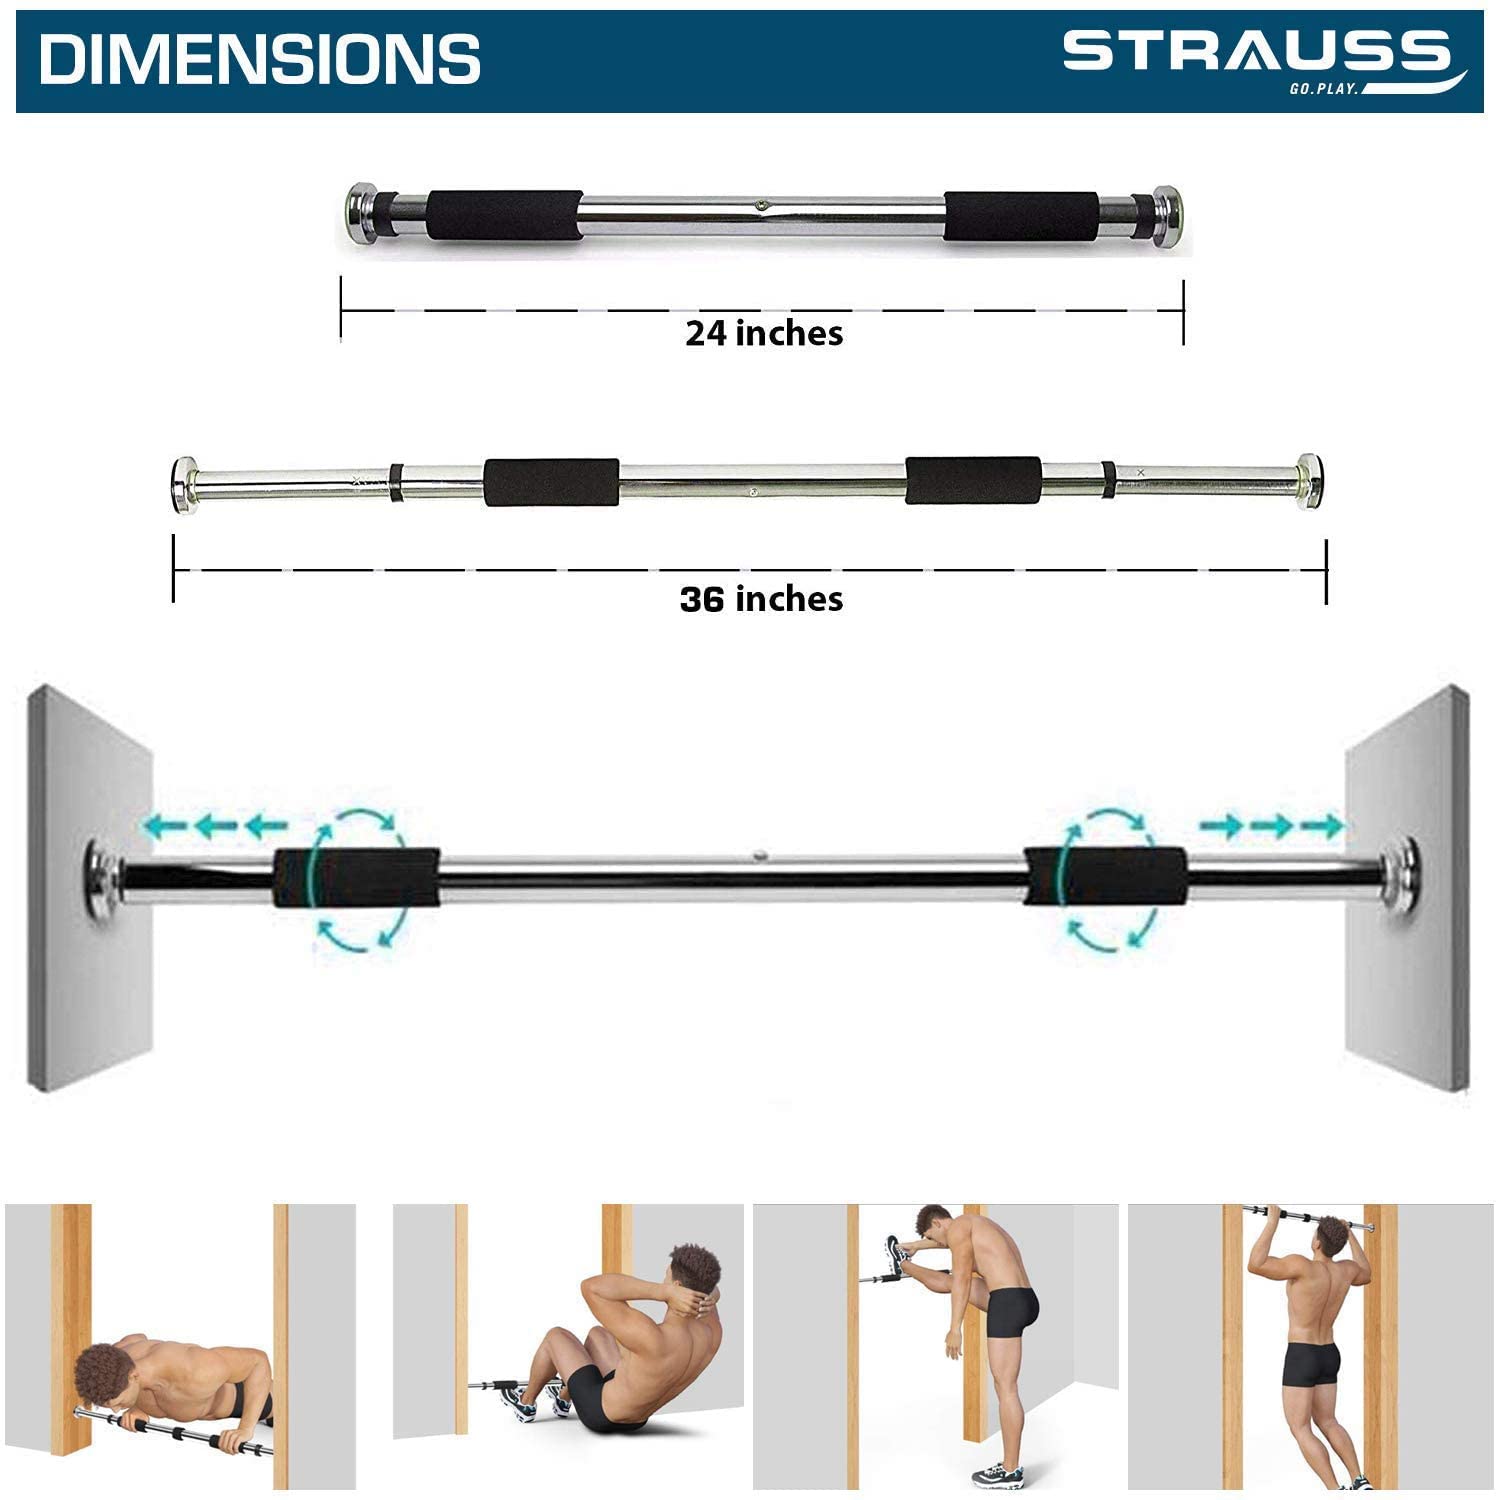 Strauss Adjustable Pull Up/Chin Up Door Bar | Heavy Duty Steel Coating with Solid Iron Construction | Superior Safety with Comfortable Grips & Easy Installation | Max Weight Upto 90 Kgs (Black/Silver)